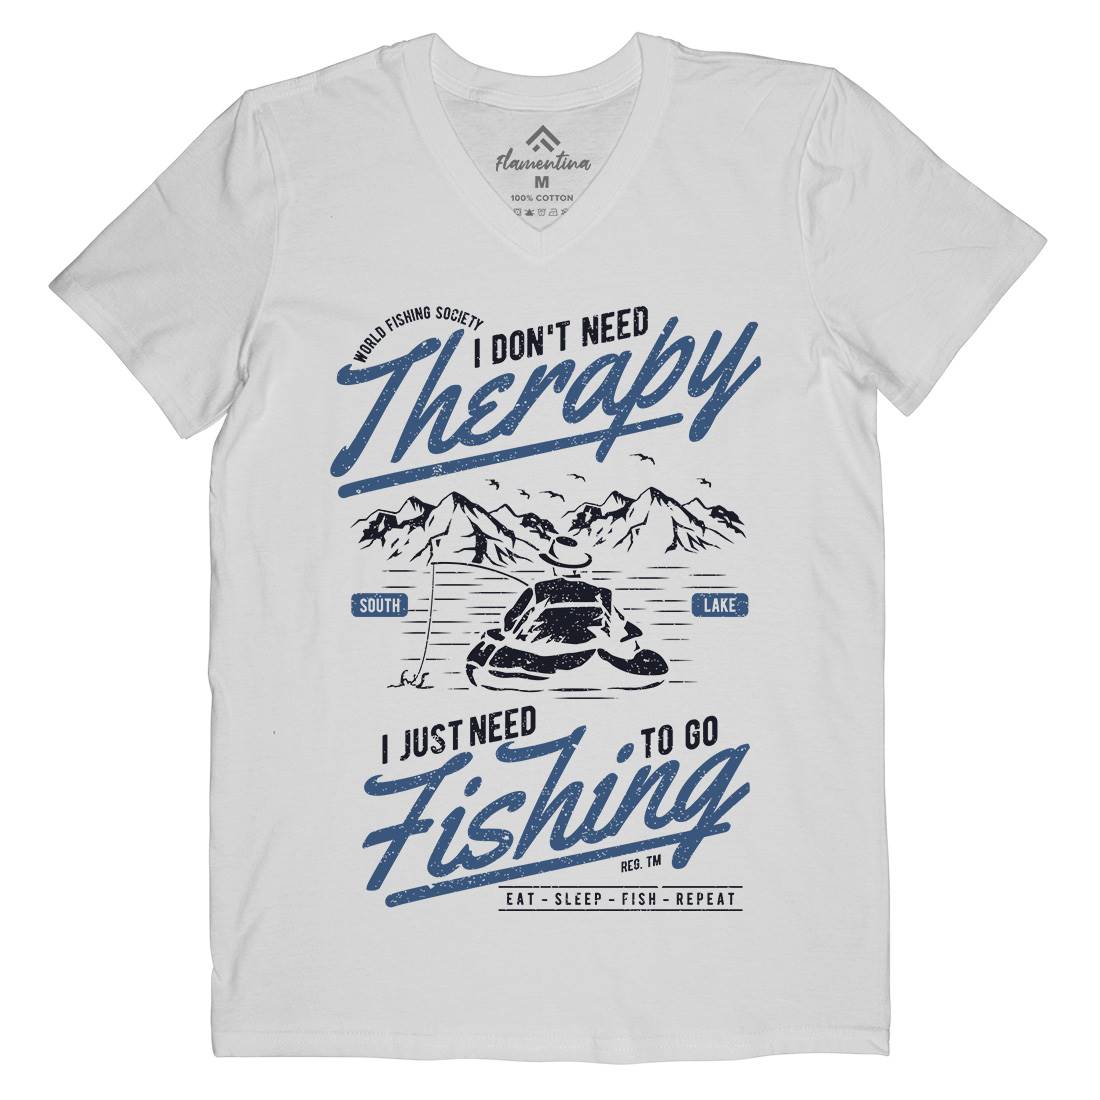 Therapy Mens V-Neck T-Shirt Fishing A662